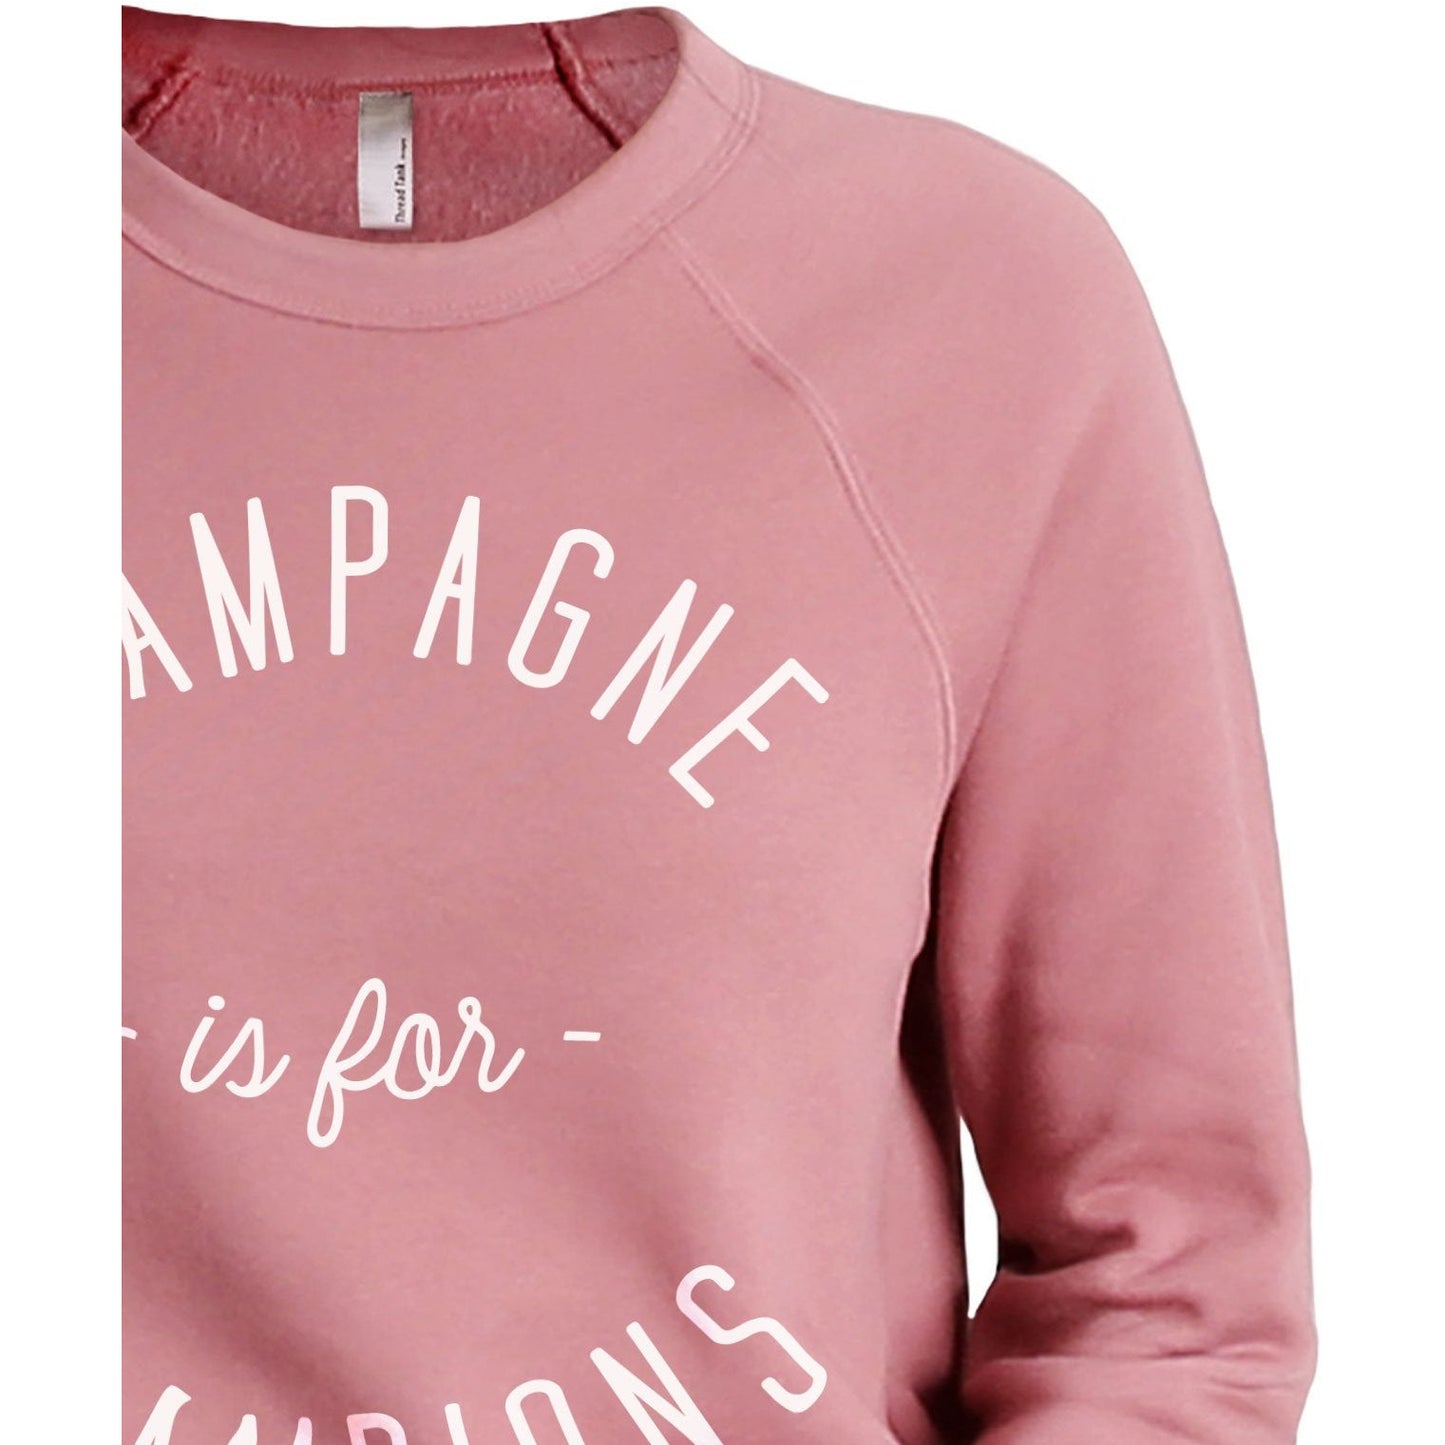 Champagne Is For Champions Women's Cozy Fleece Longsleeves Sweater Rouge Closeup Details